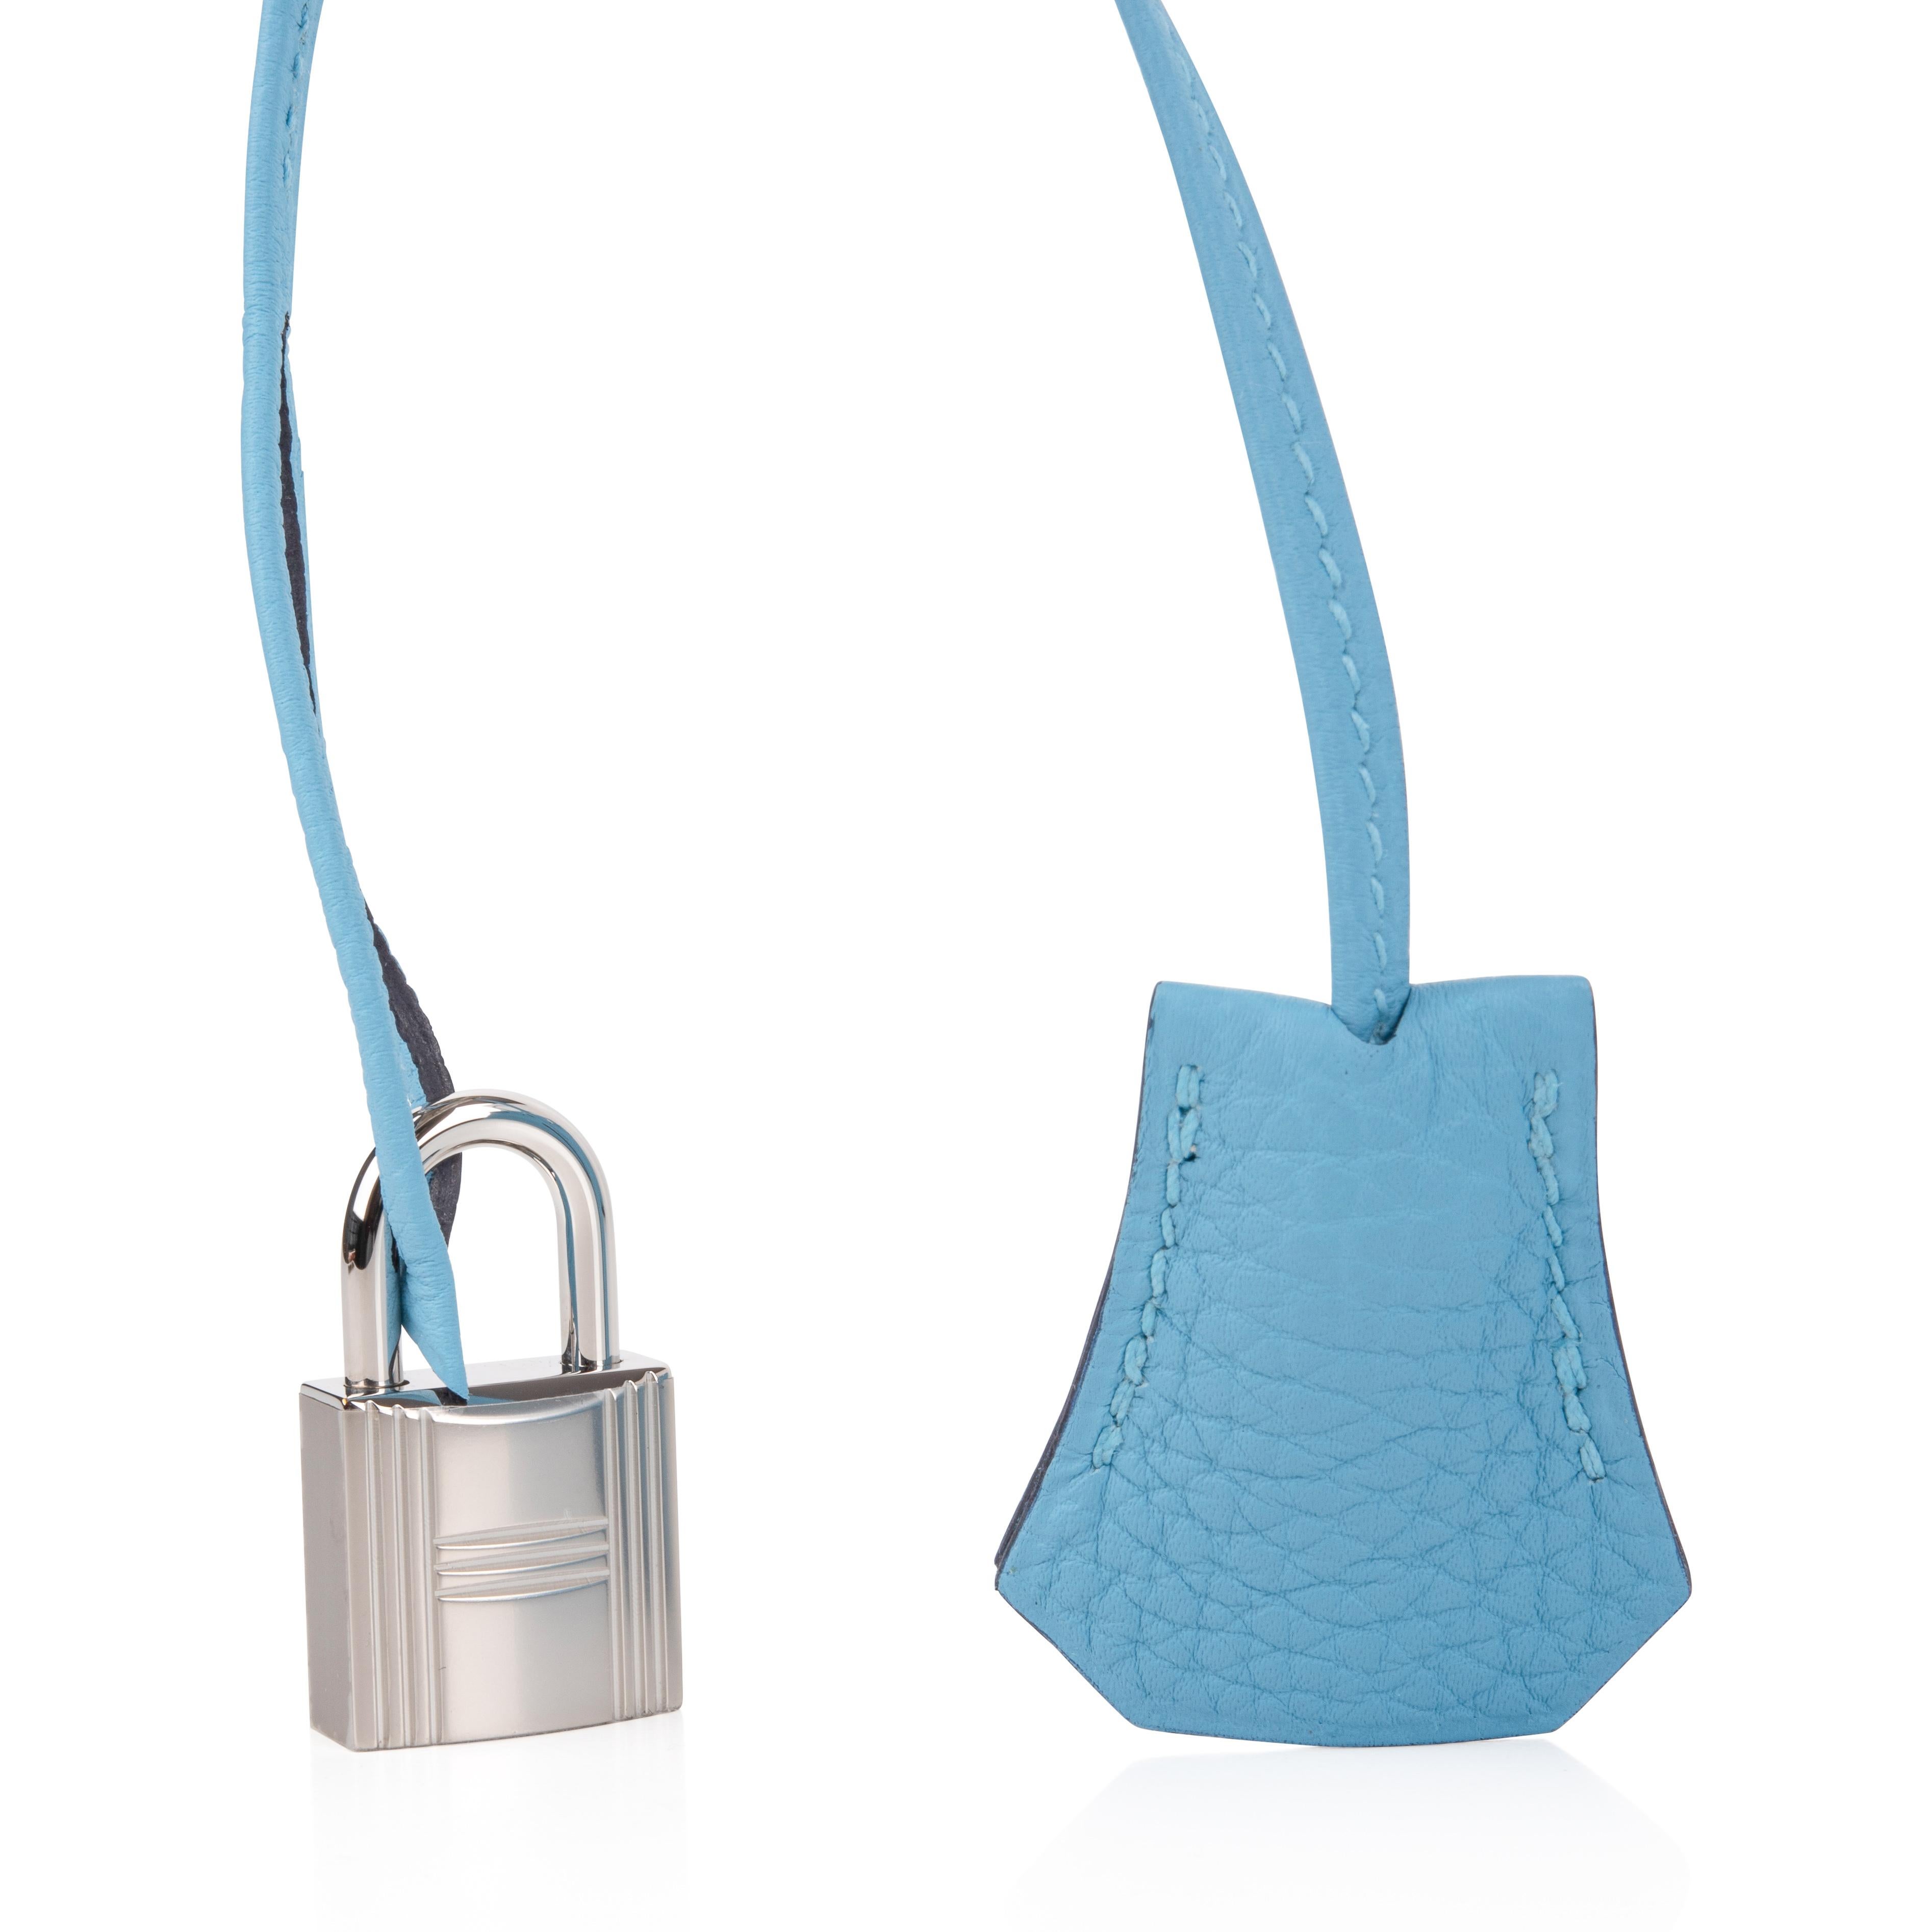 Mightychic offers a guaranteed authentic Hermes Birkin 30 bag featured in Bleu du Nord.
This beautiful sky blue is complimented with palladium hardware.
Togo leather has natural texture and is scratch resistant. 
Comes with the lock and keys in the